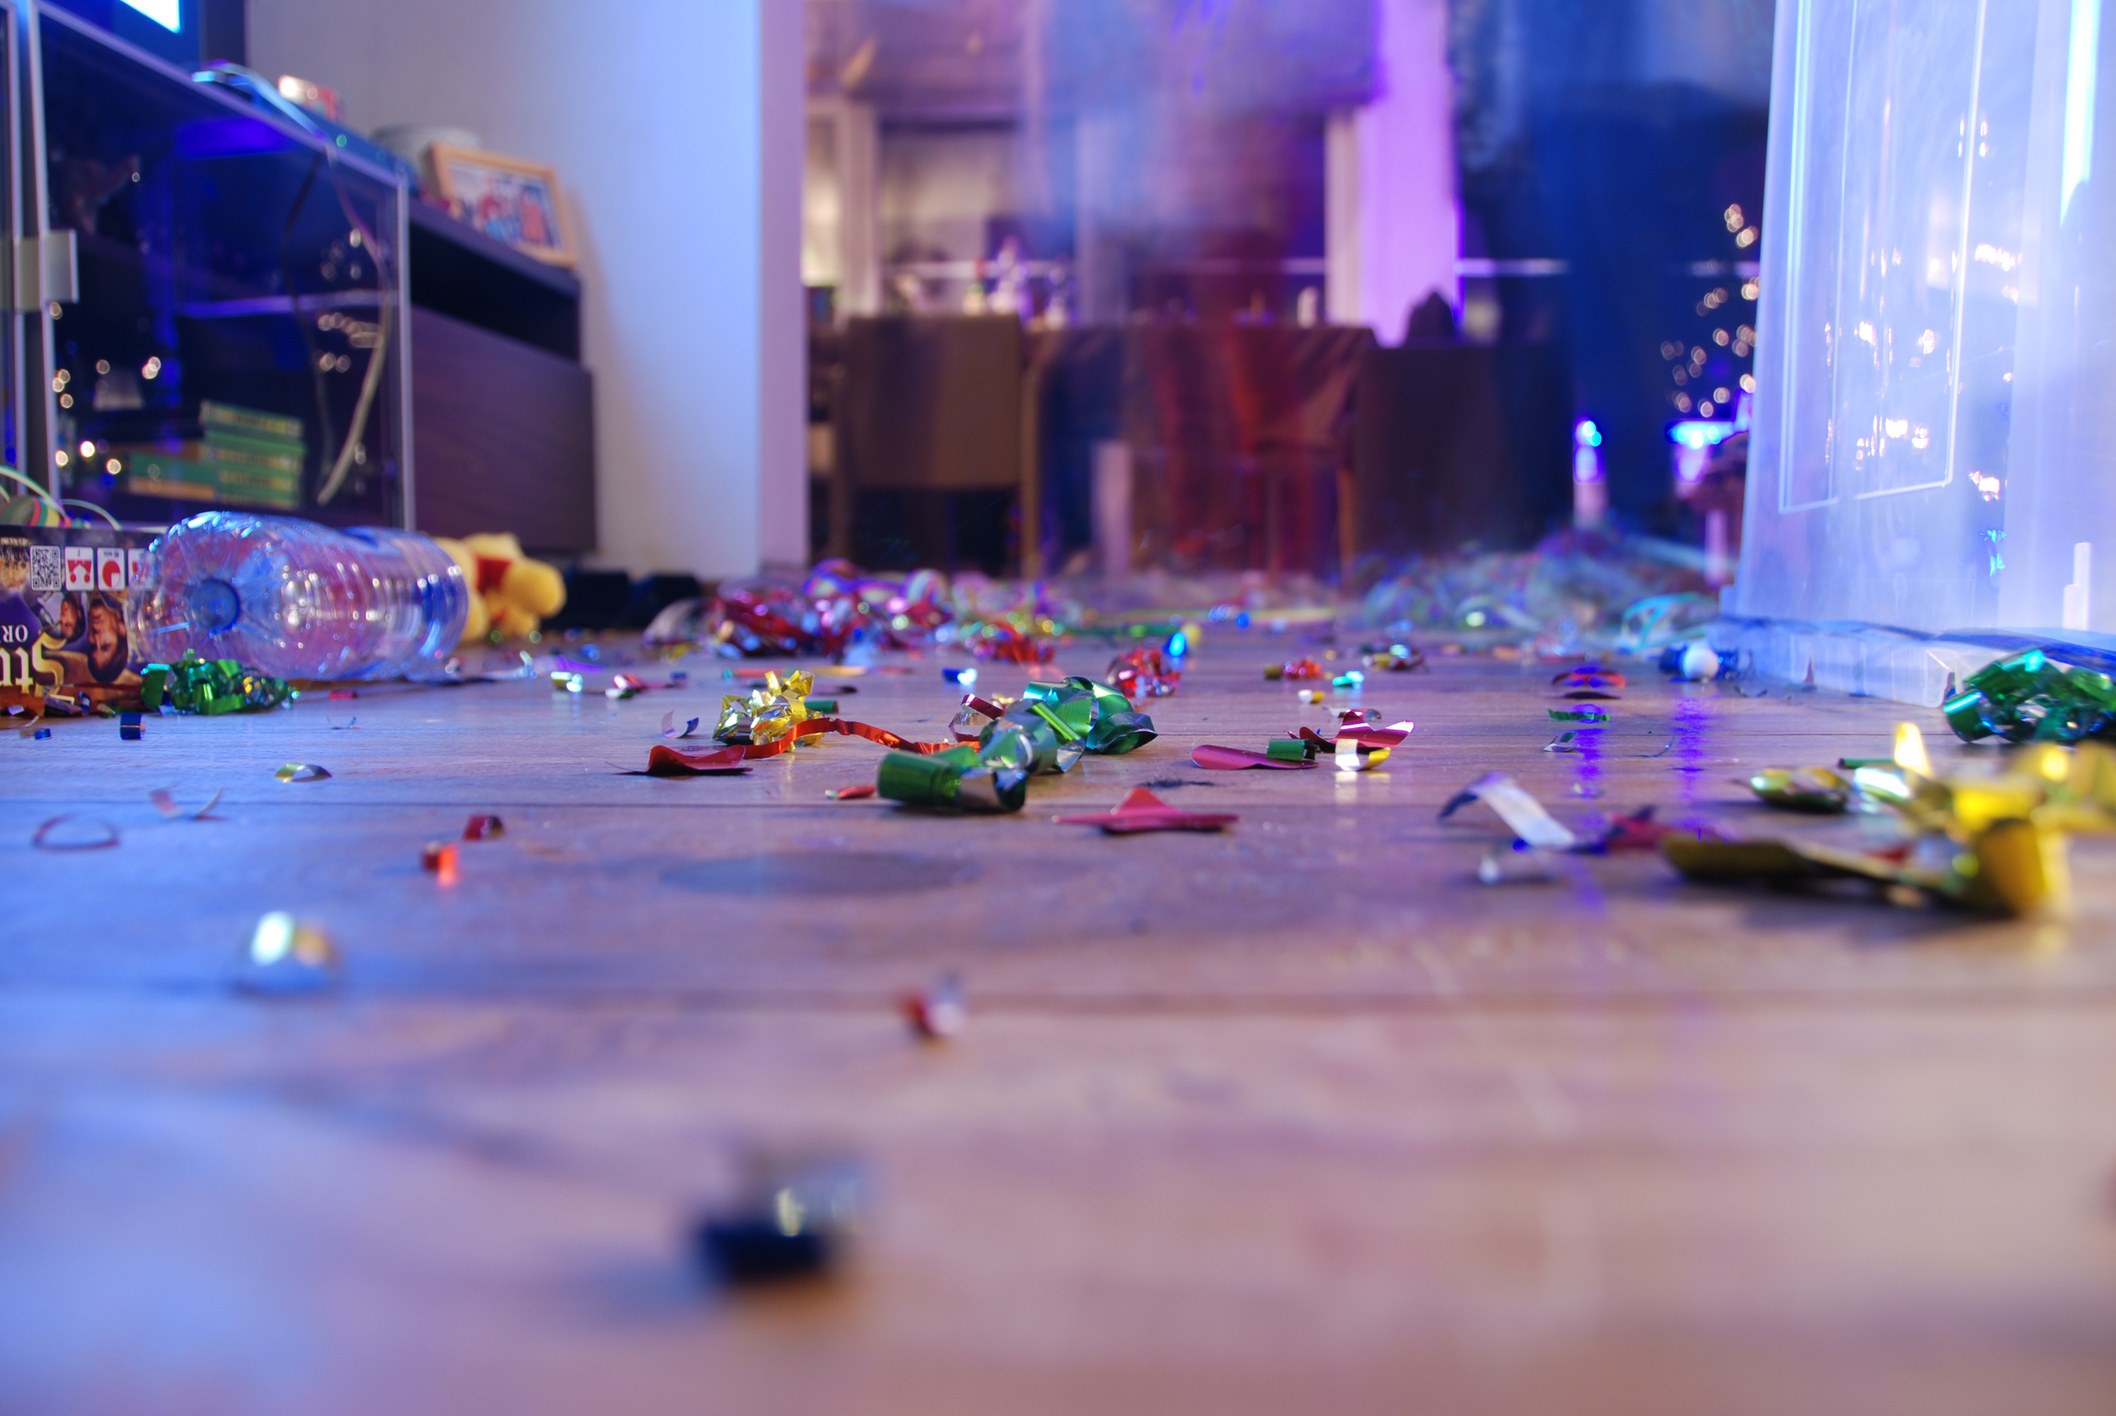 the aftermath of a party, featuring empty bottles and confetti all over the floor